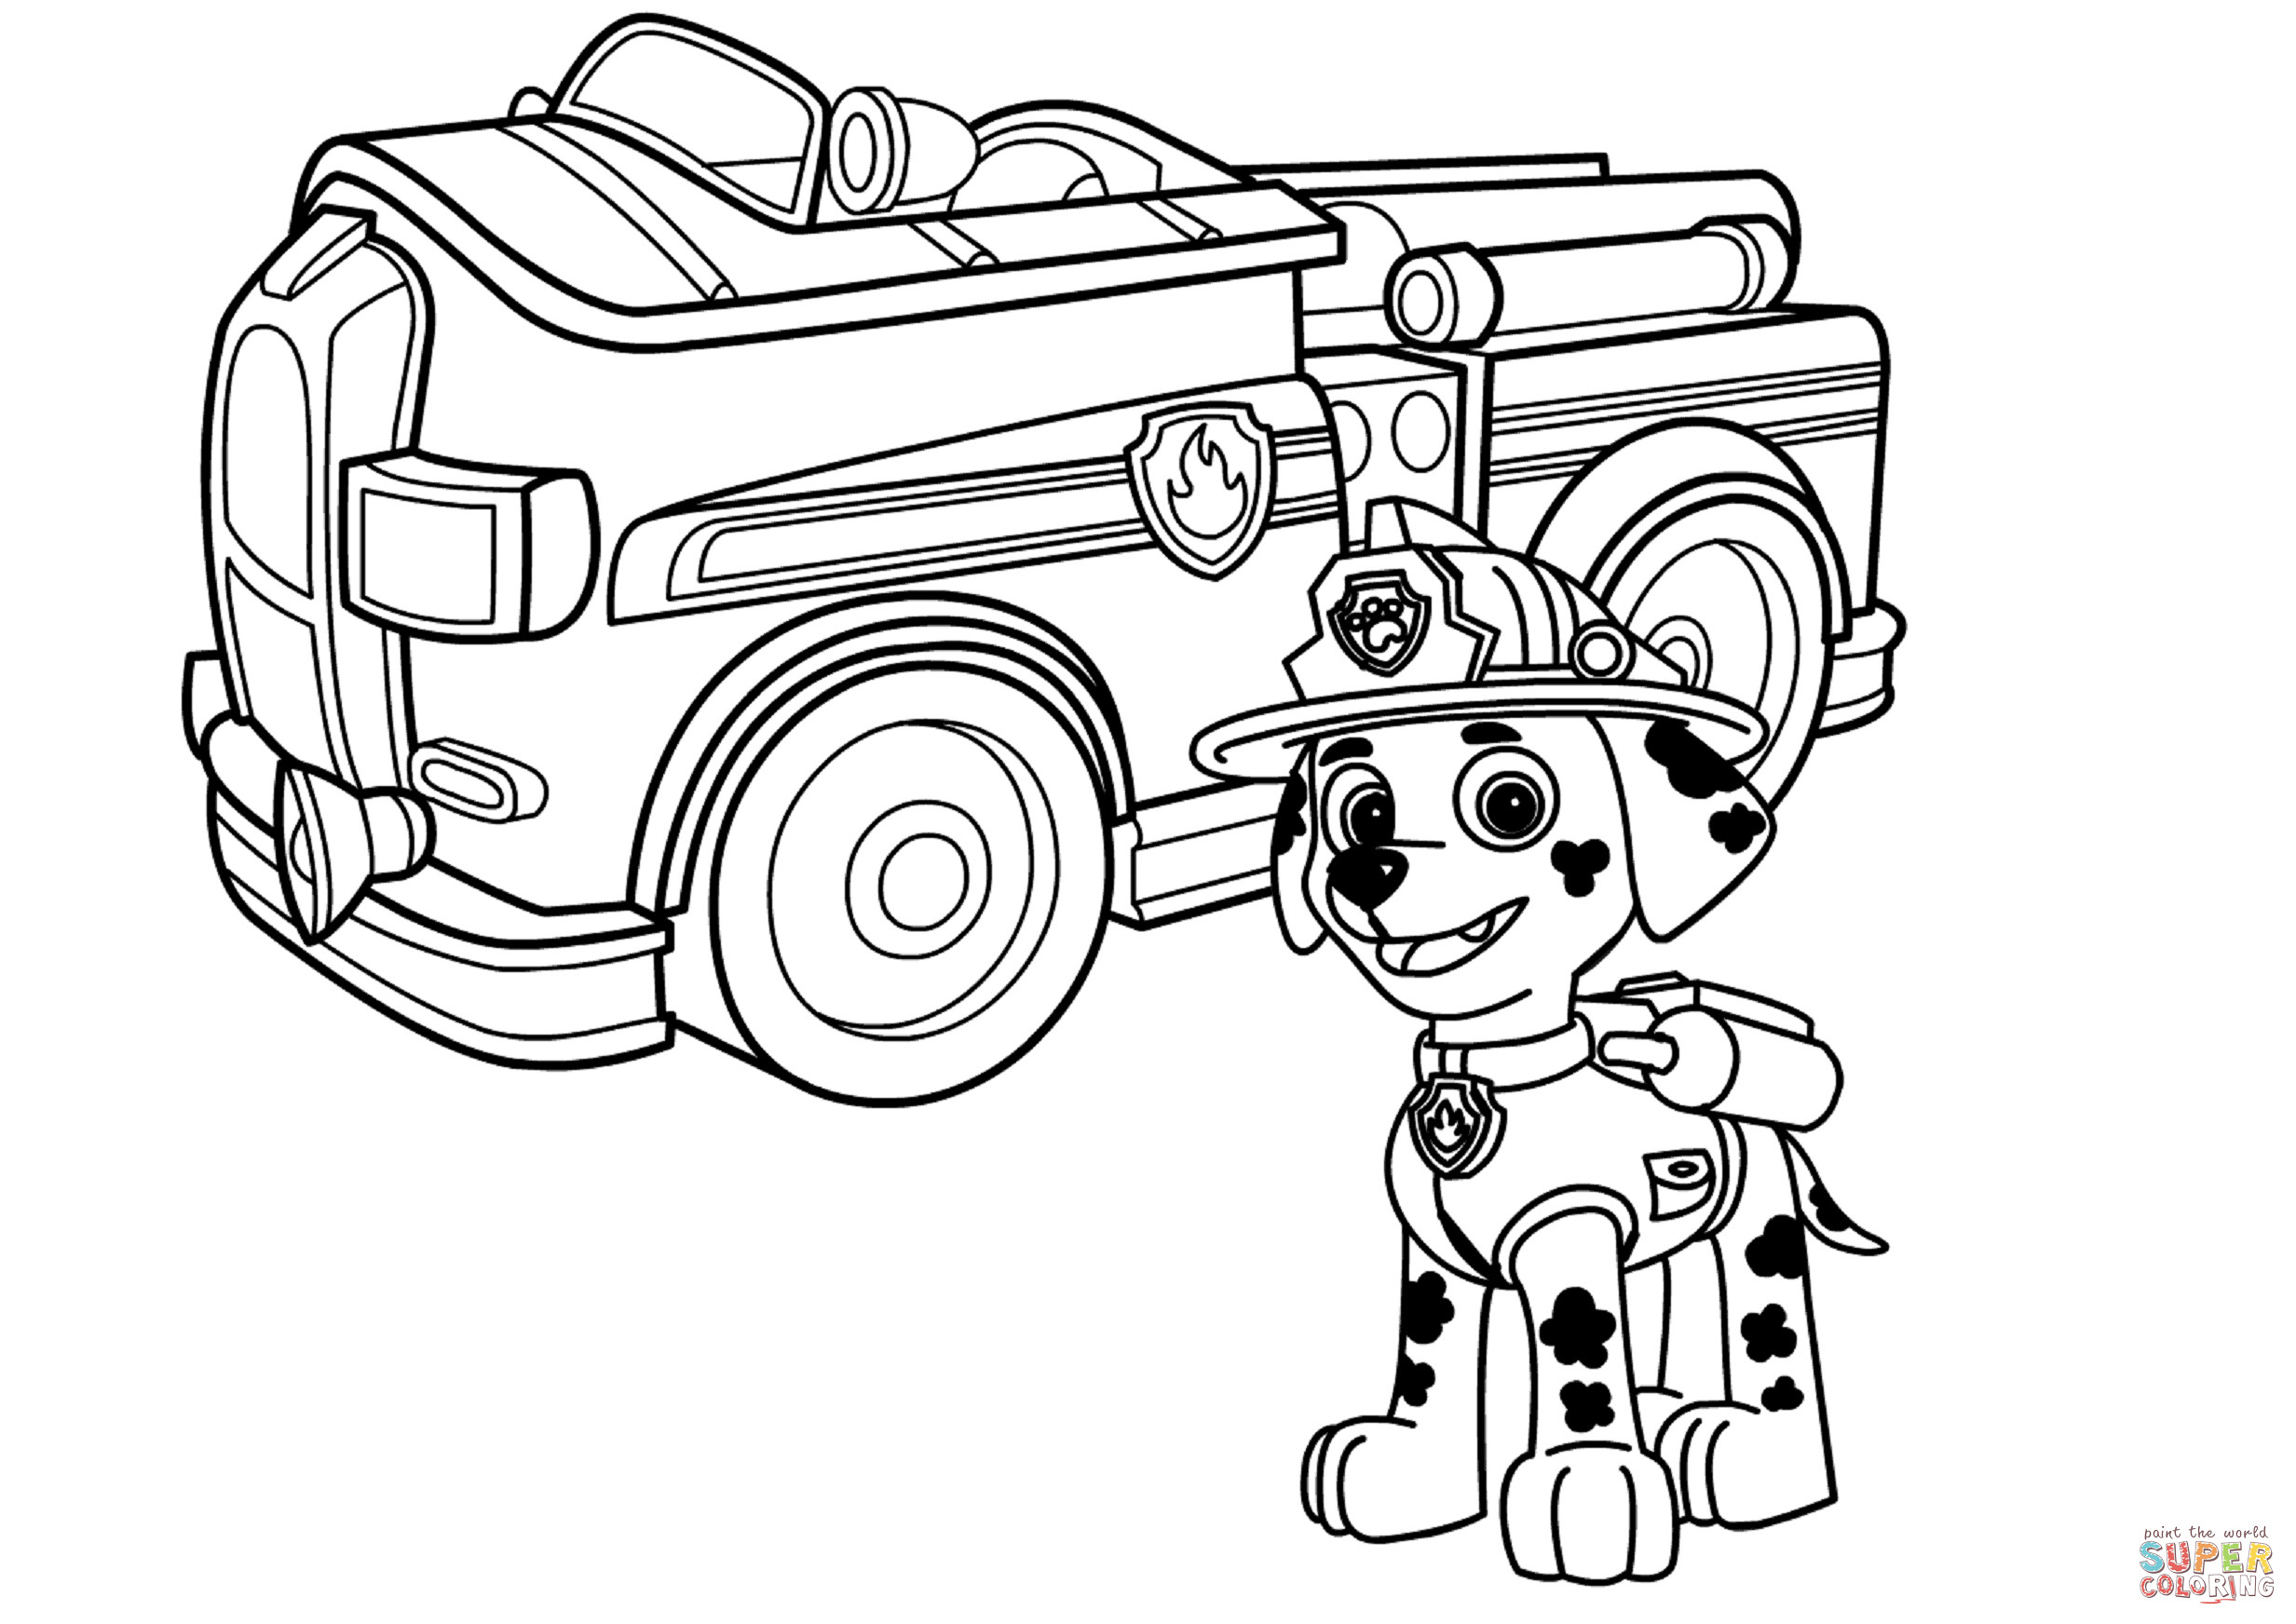 Fire Truck Coloring Pages Printable
 Paw Patrol Marshall with Fire Truck coloring page